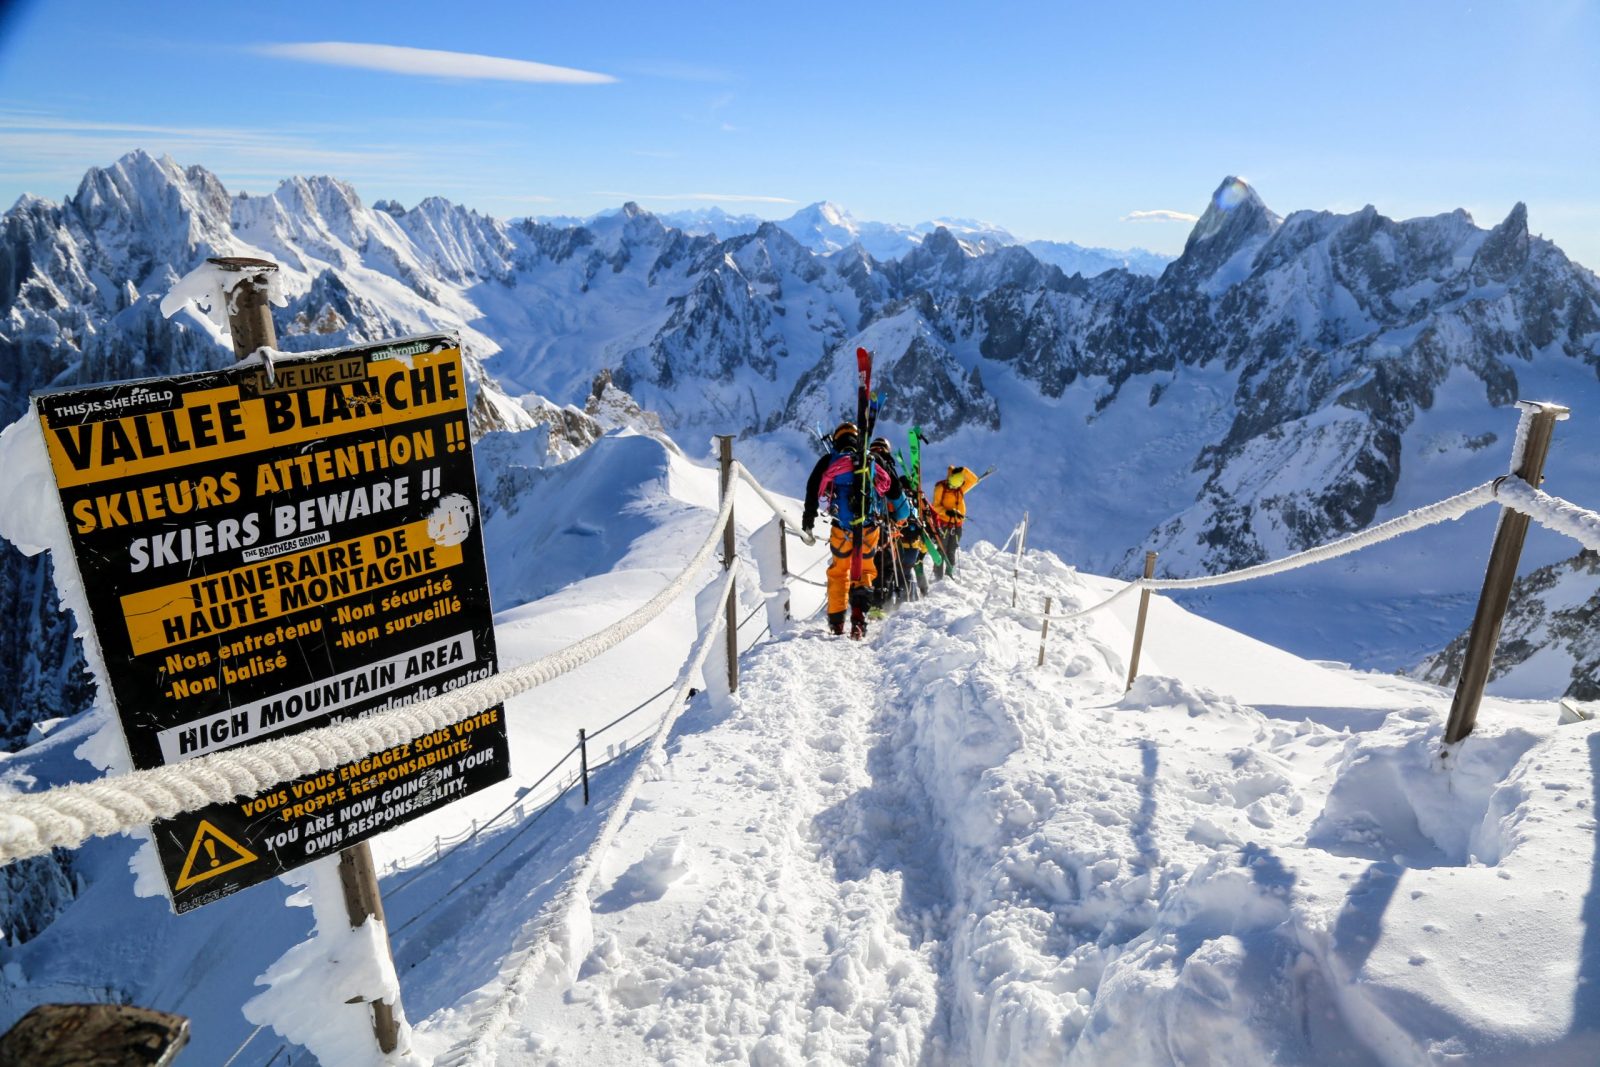 Entrance to the Vallée Blanche from Aiguille du Midi. Photo: Salome Abrial. OT Vallée de Chamonix. Must-Read guide to Chamonix.